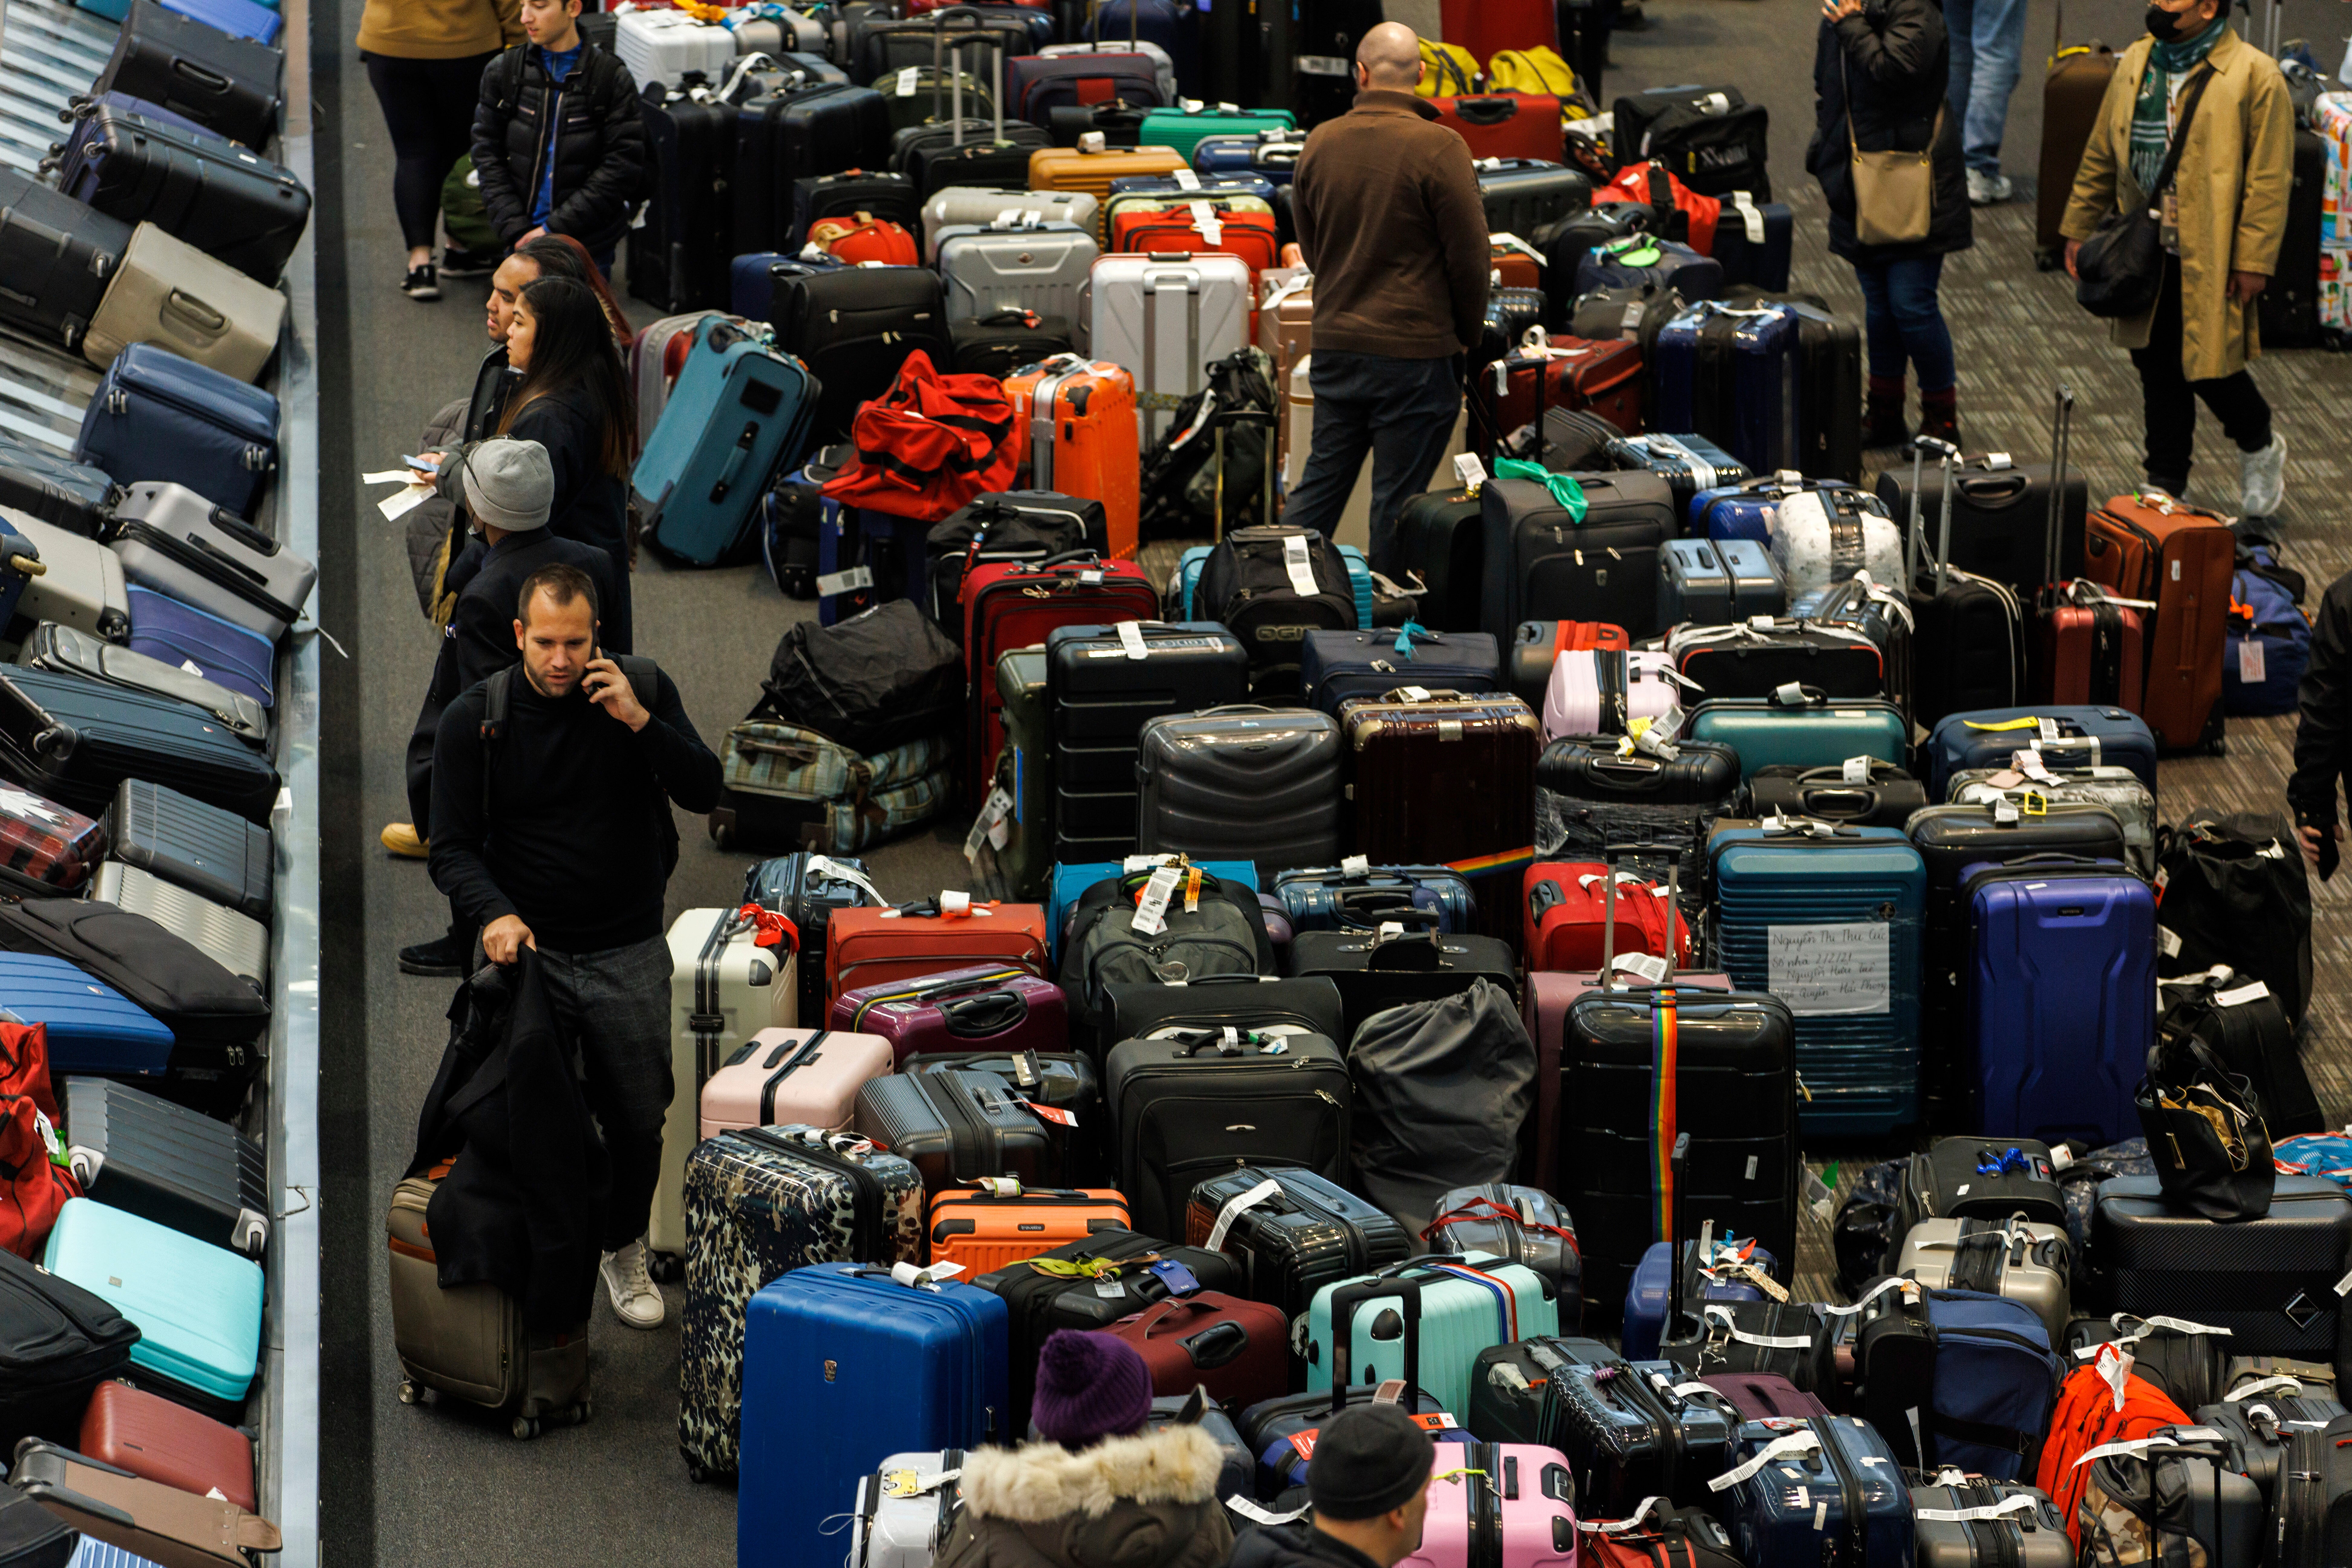 Luggage bags are amassed in the bag claim area at Toronto Pearson International Airport, as a major winter storm disrupts flights in and out of the airport, in Toronto, Saturday, Dec. 24, 2022